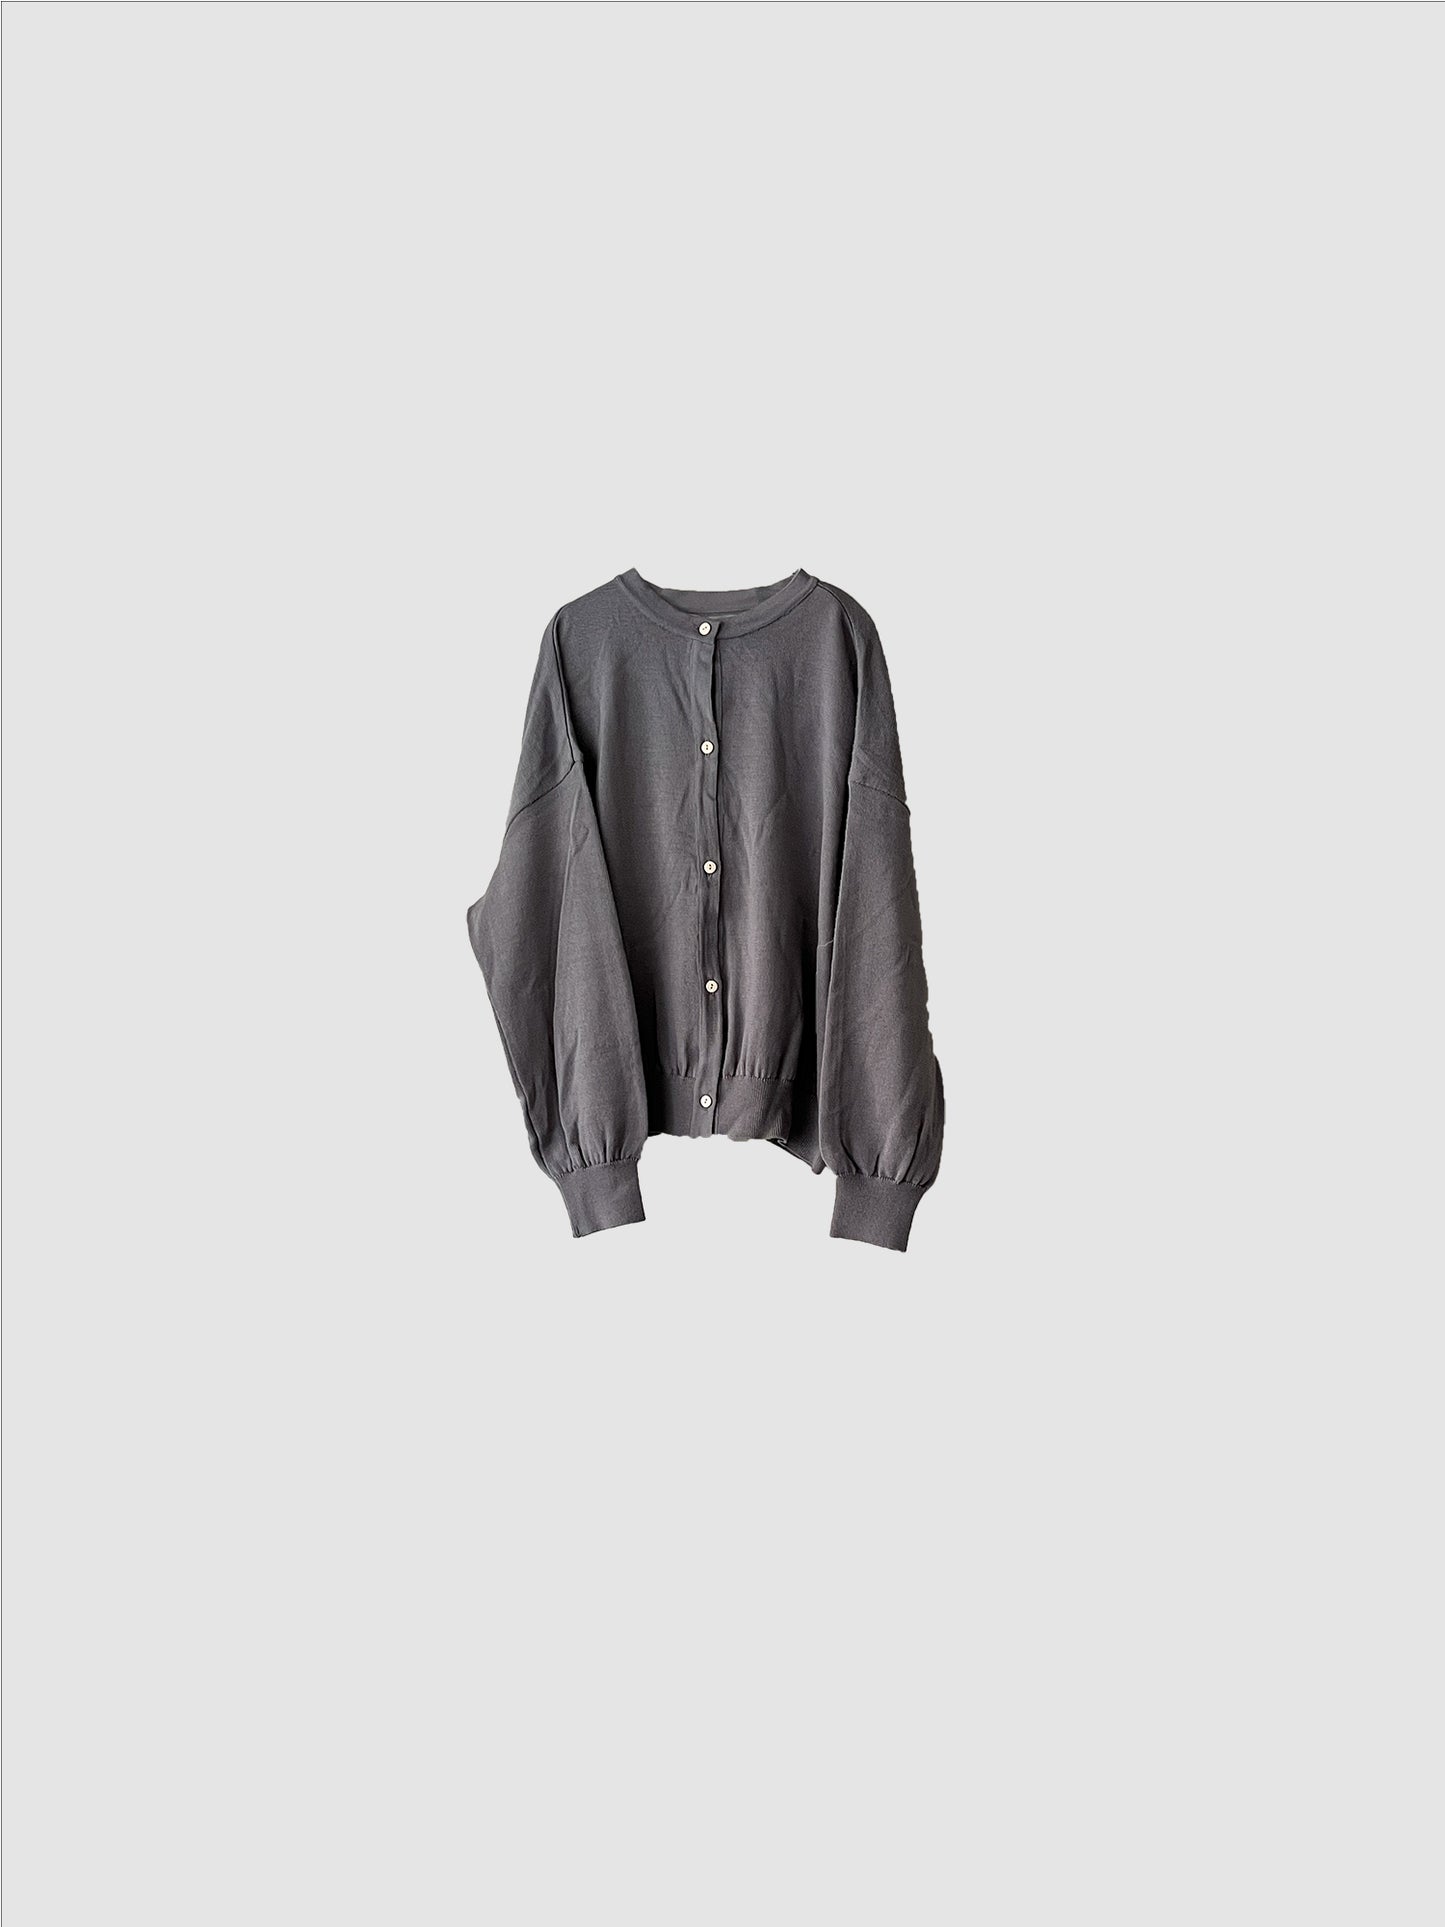 Wide cardigan / S size